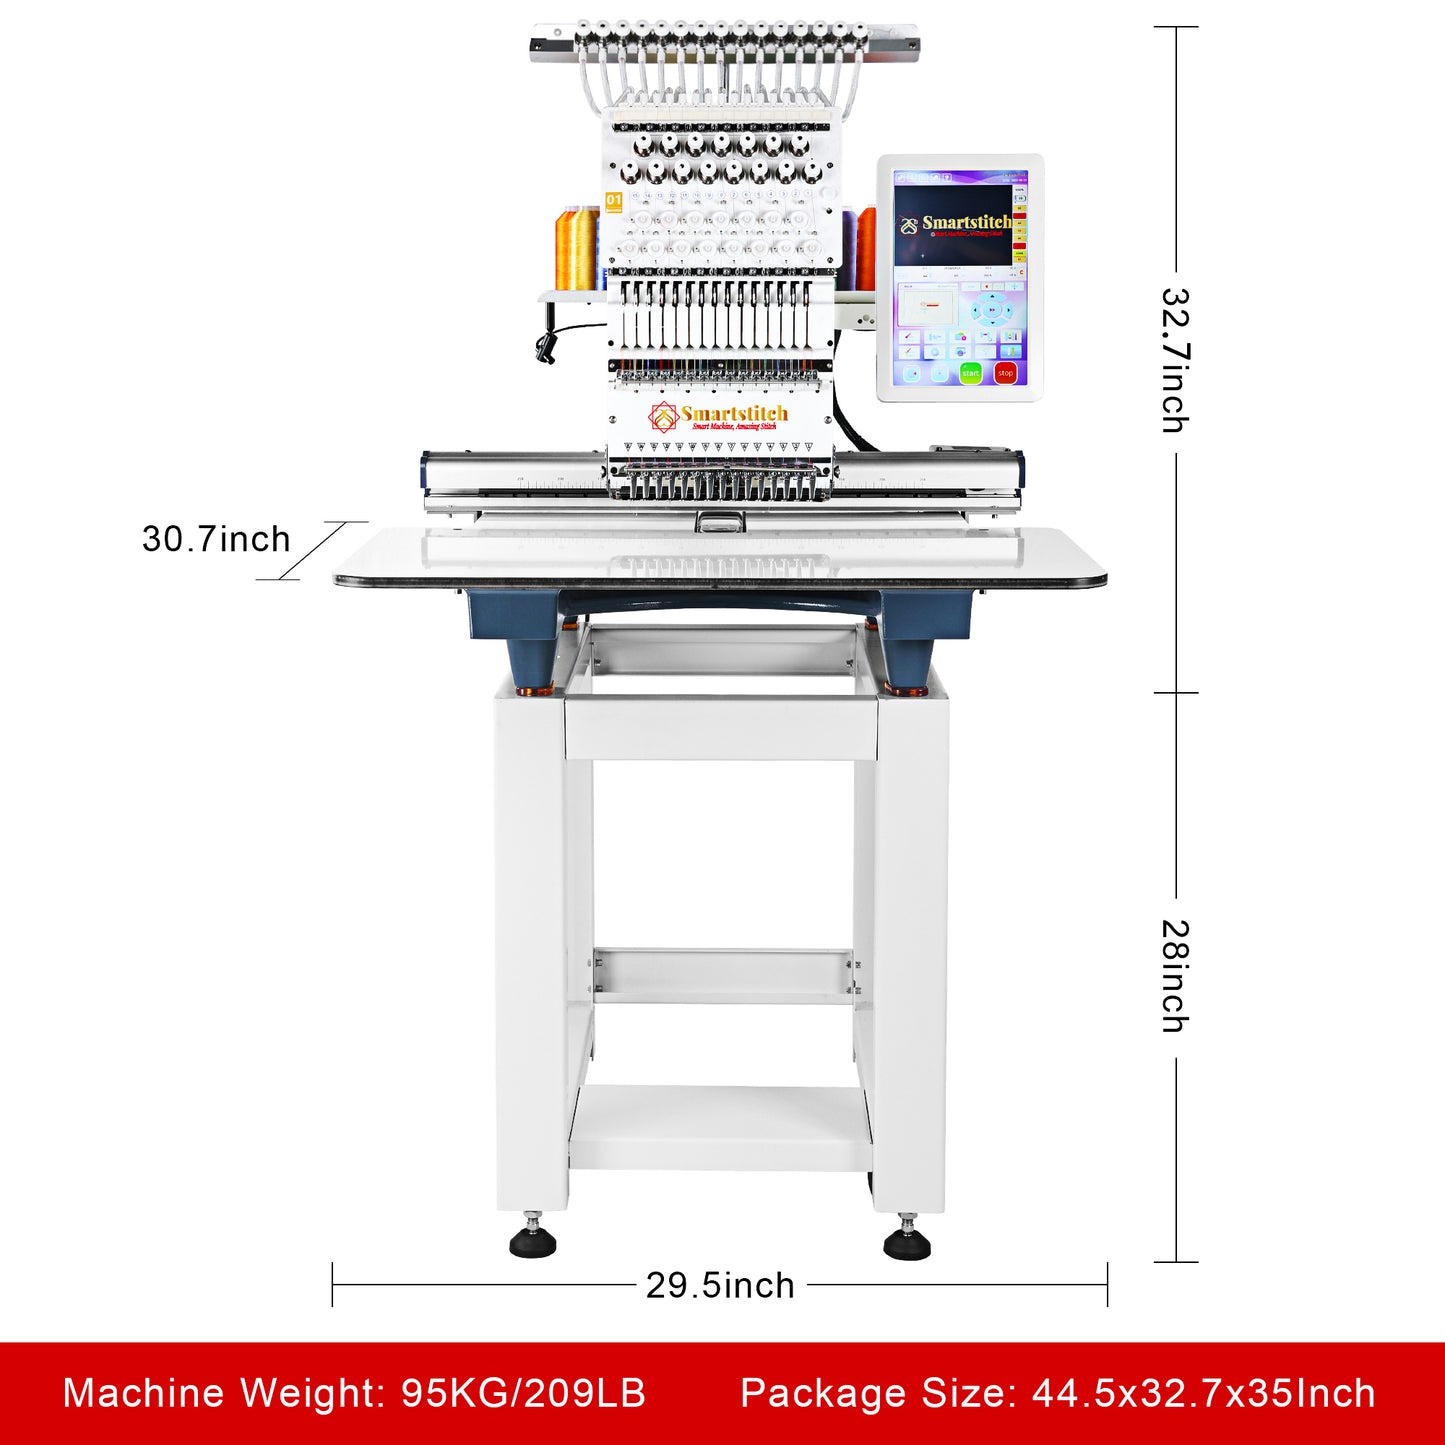 Smartstitch Embroidery Machine S1501, 15 Needles, Max Speed 1200RPM,  Commercial Embroidery Machine for Hats and Clothing with 13.8"x19.7" Embroidery Area (including embroidery starter kit)